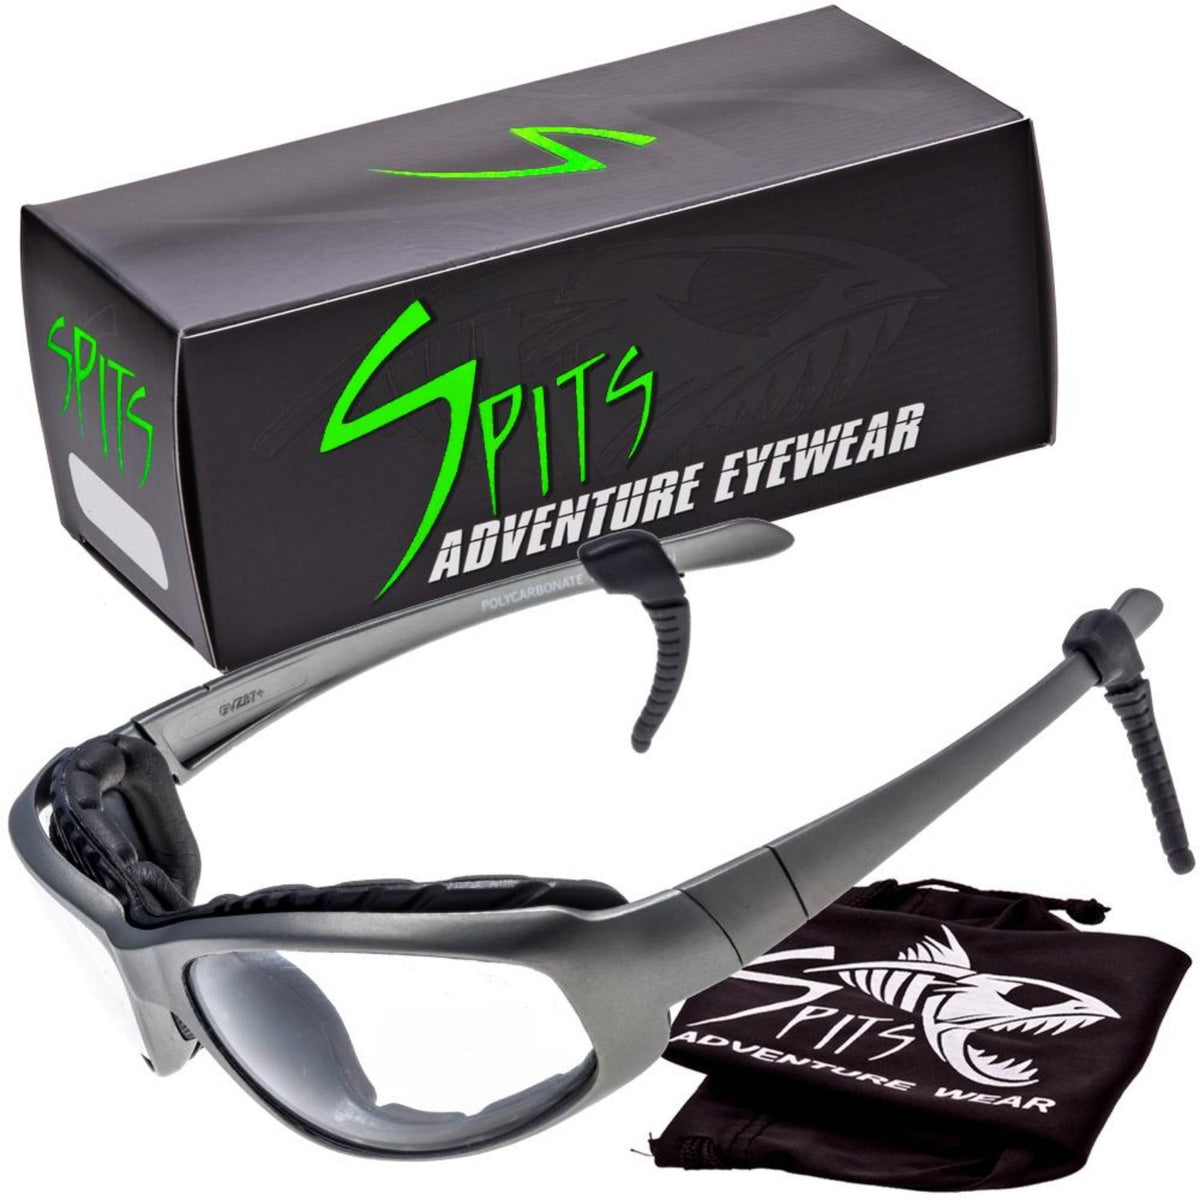 Sniper Gray -  Safety Rated Sunglasses Various Lens Colors, Photochromic and Foam Padding Options